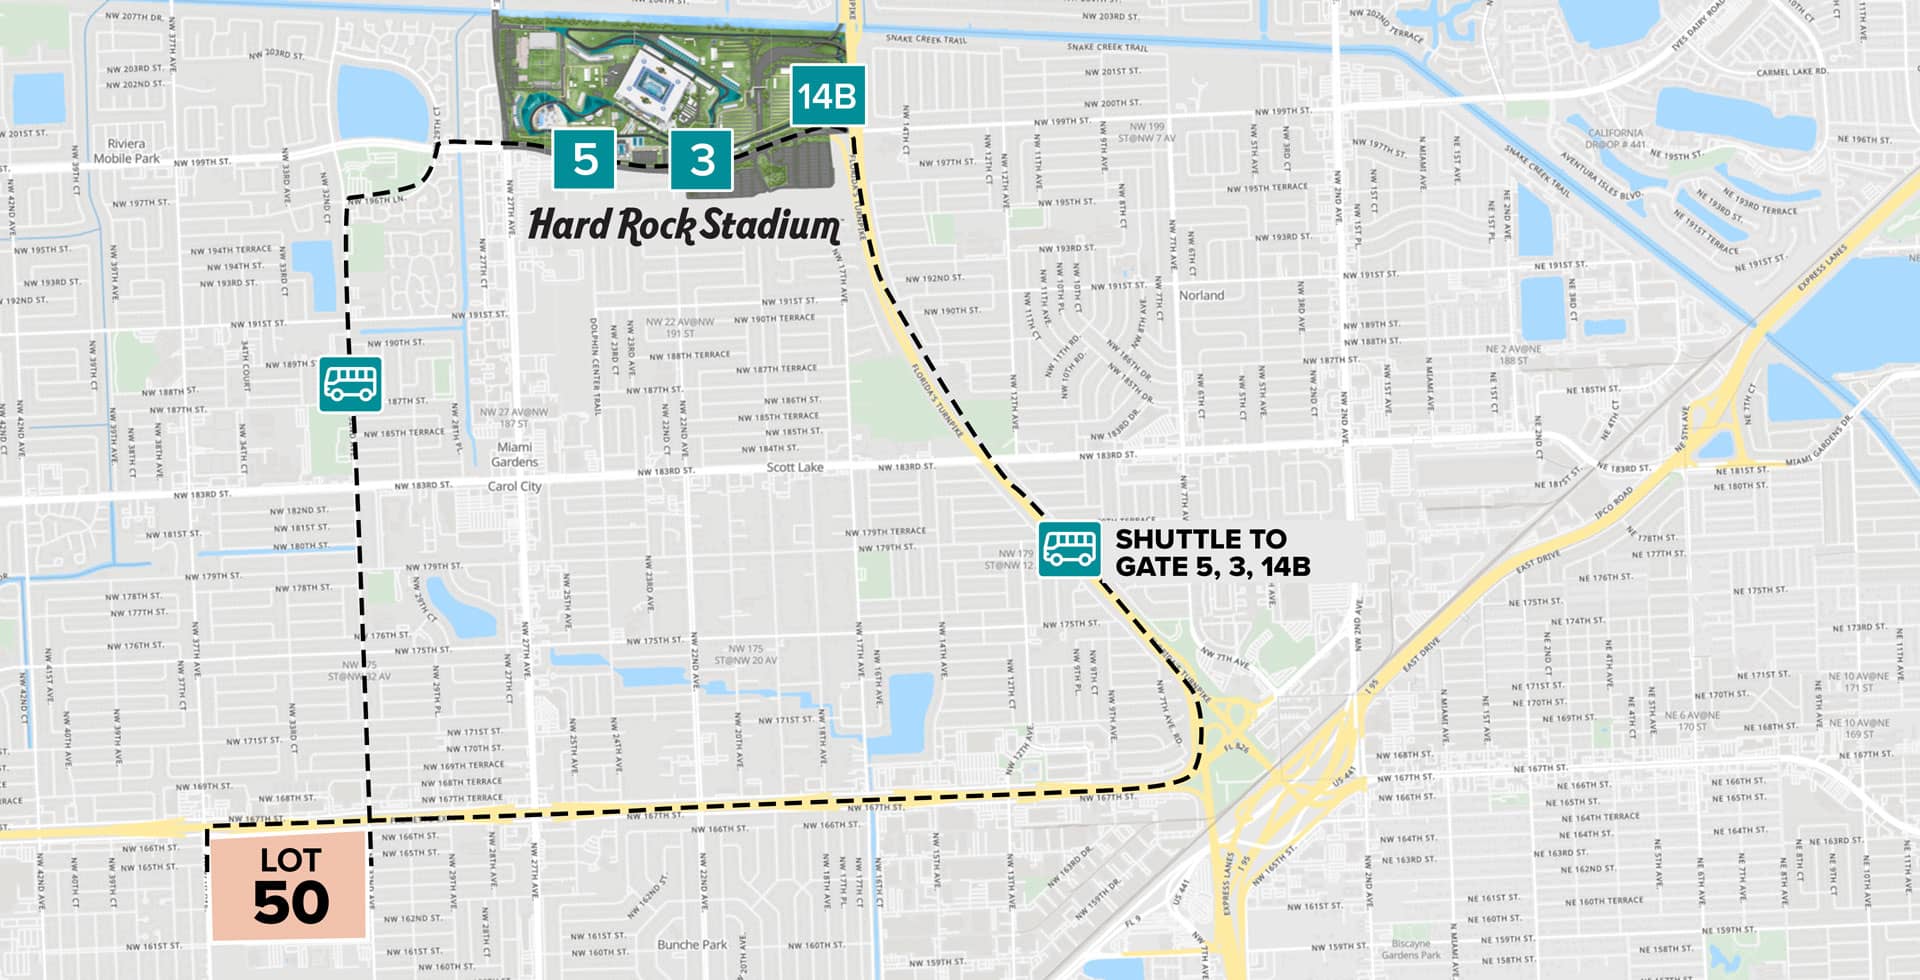 F1 Miami Parking Guide: Official Pass & Unofficial Parking Lots